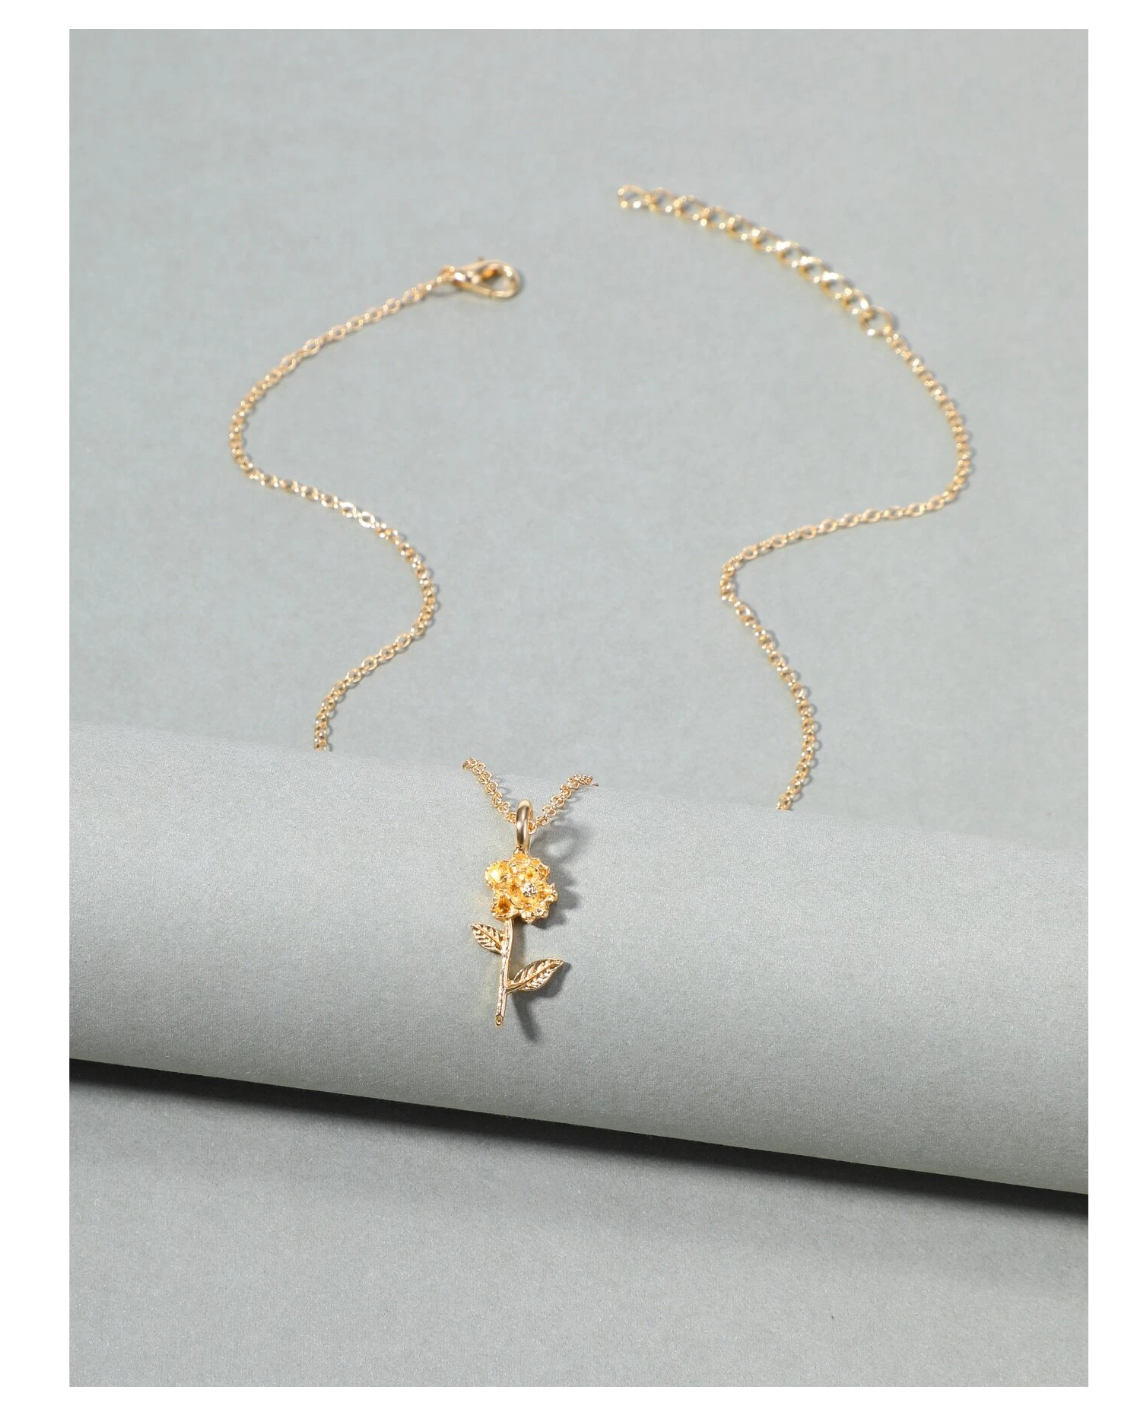 Blossoming Elegance: Flower Charm Necklace for a Touch of Timeless Beauty!